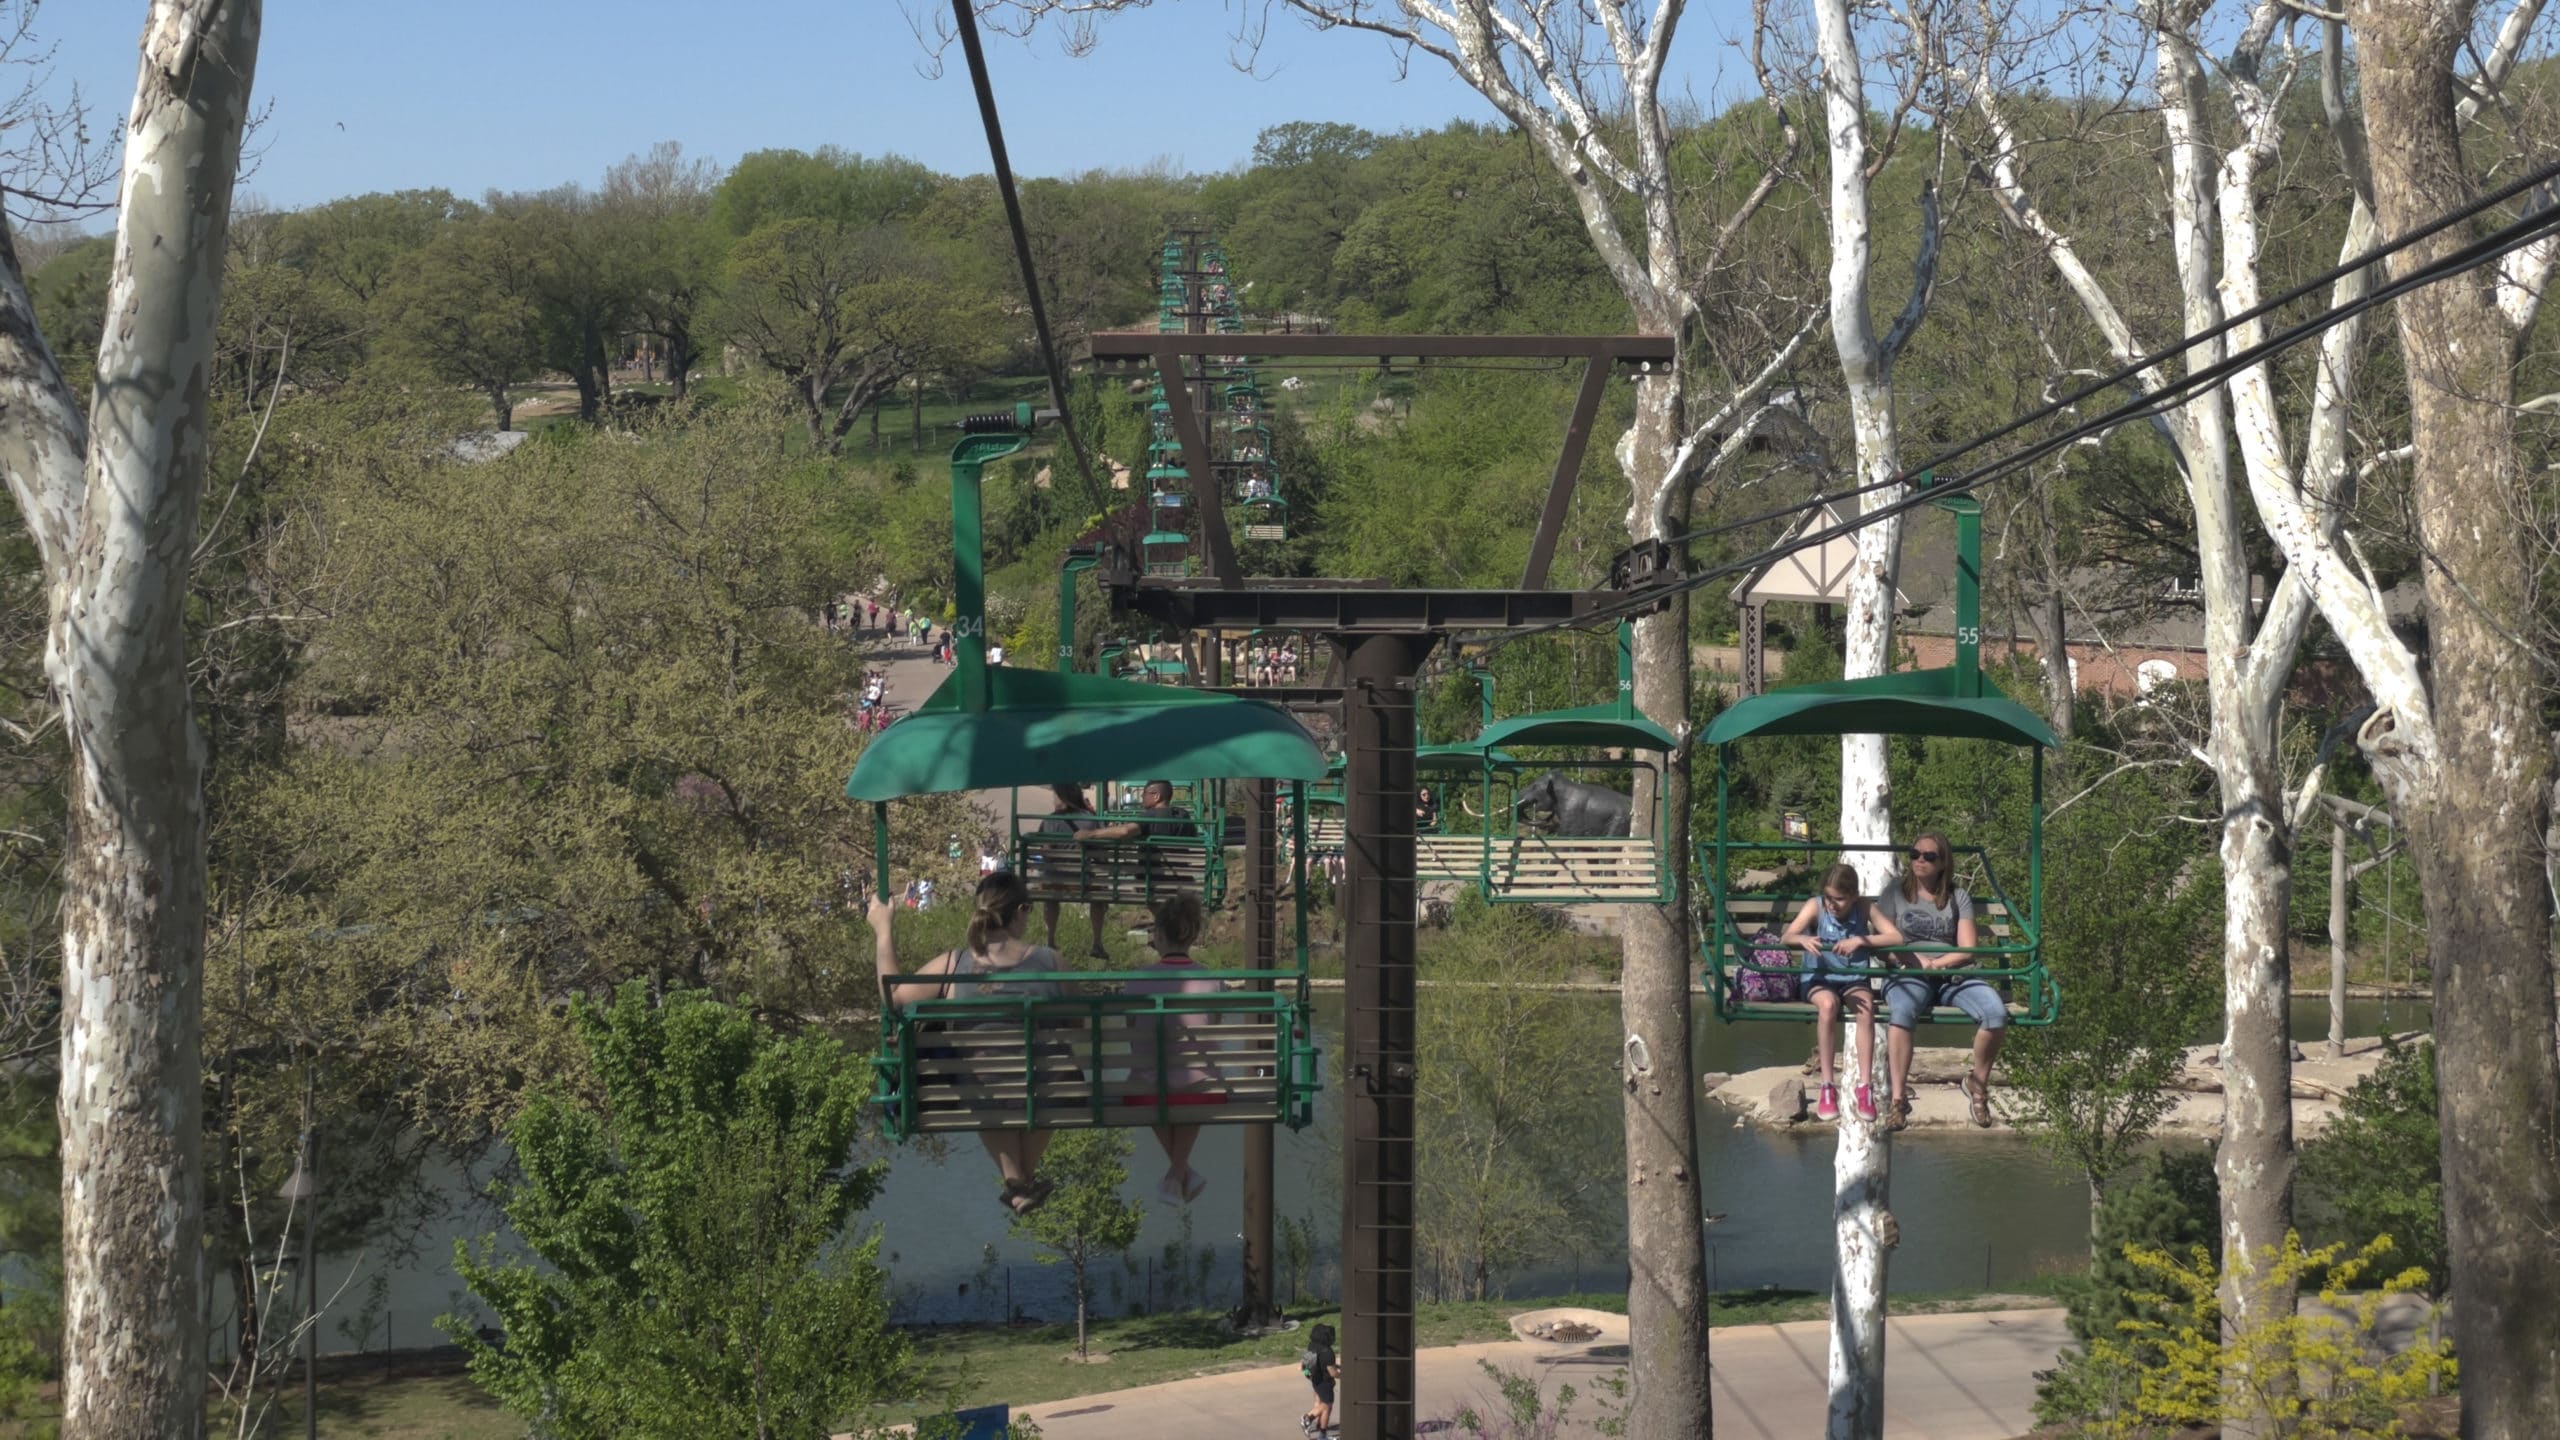 Patrons riding the skyfari, which is a ski lift style ride that travels over Lagoon and African Grasslands. 